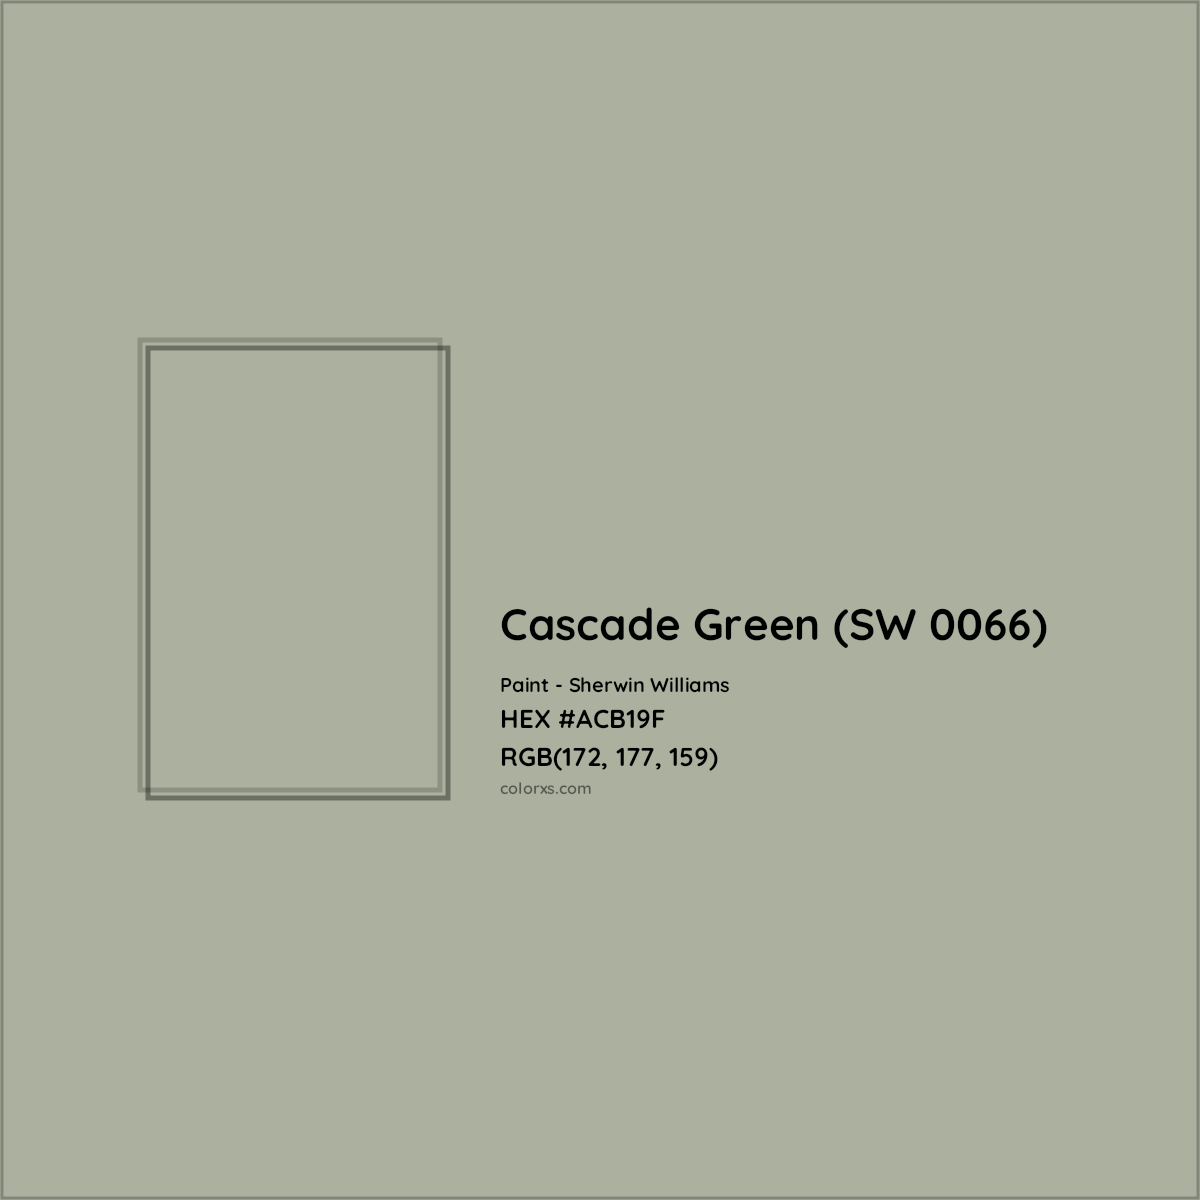 HEX #ACB19F Cascade Green (SW 0066) Paint Sherwin Williams - Color Code